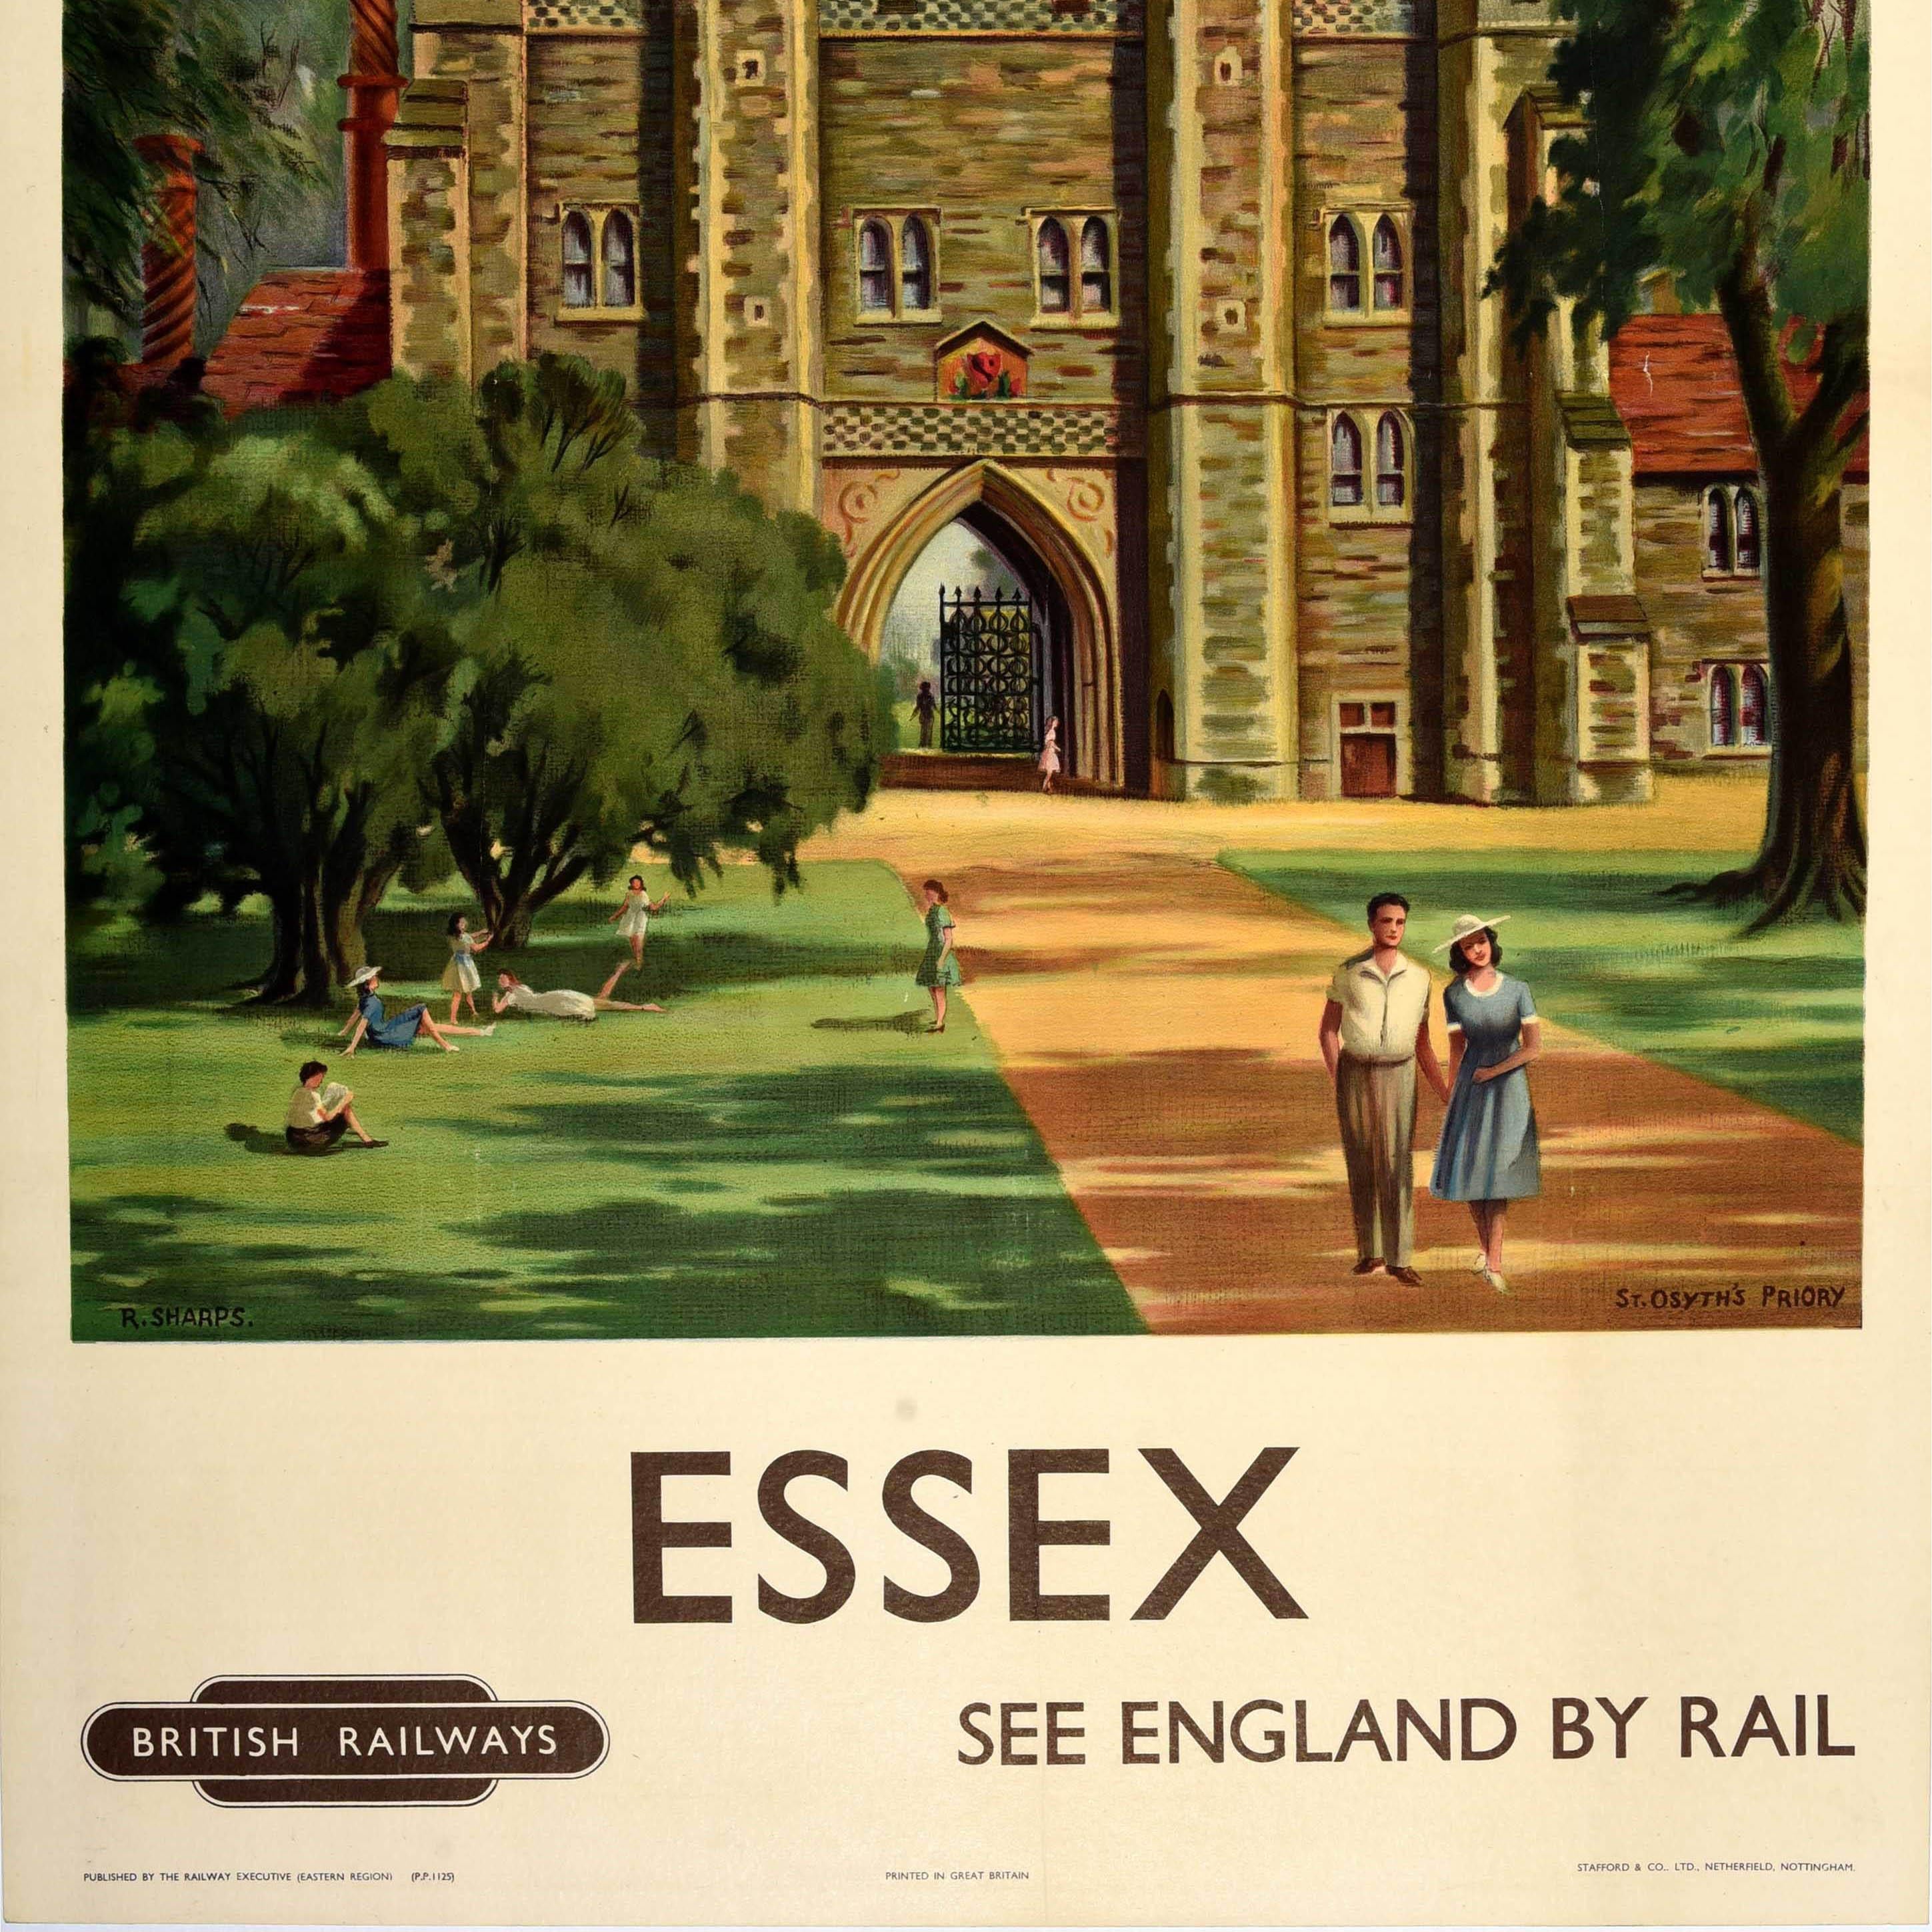 Original vintage British Railways travel poster - Essex See England by Rail - featuring a great image of St. Osyth's Priory depicting a lady and man walking along a path towards the viewer with people relaxing and children playing on the grass under